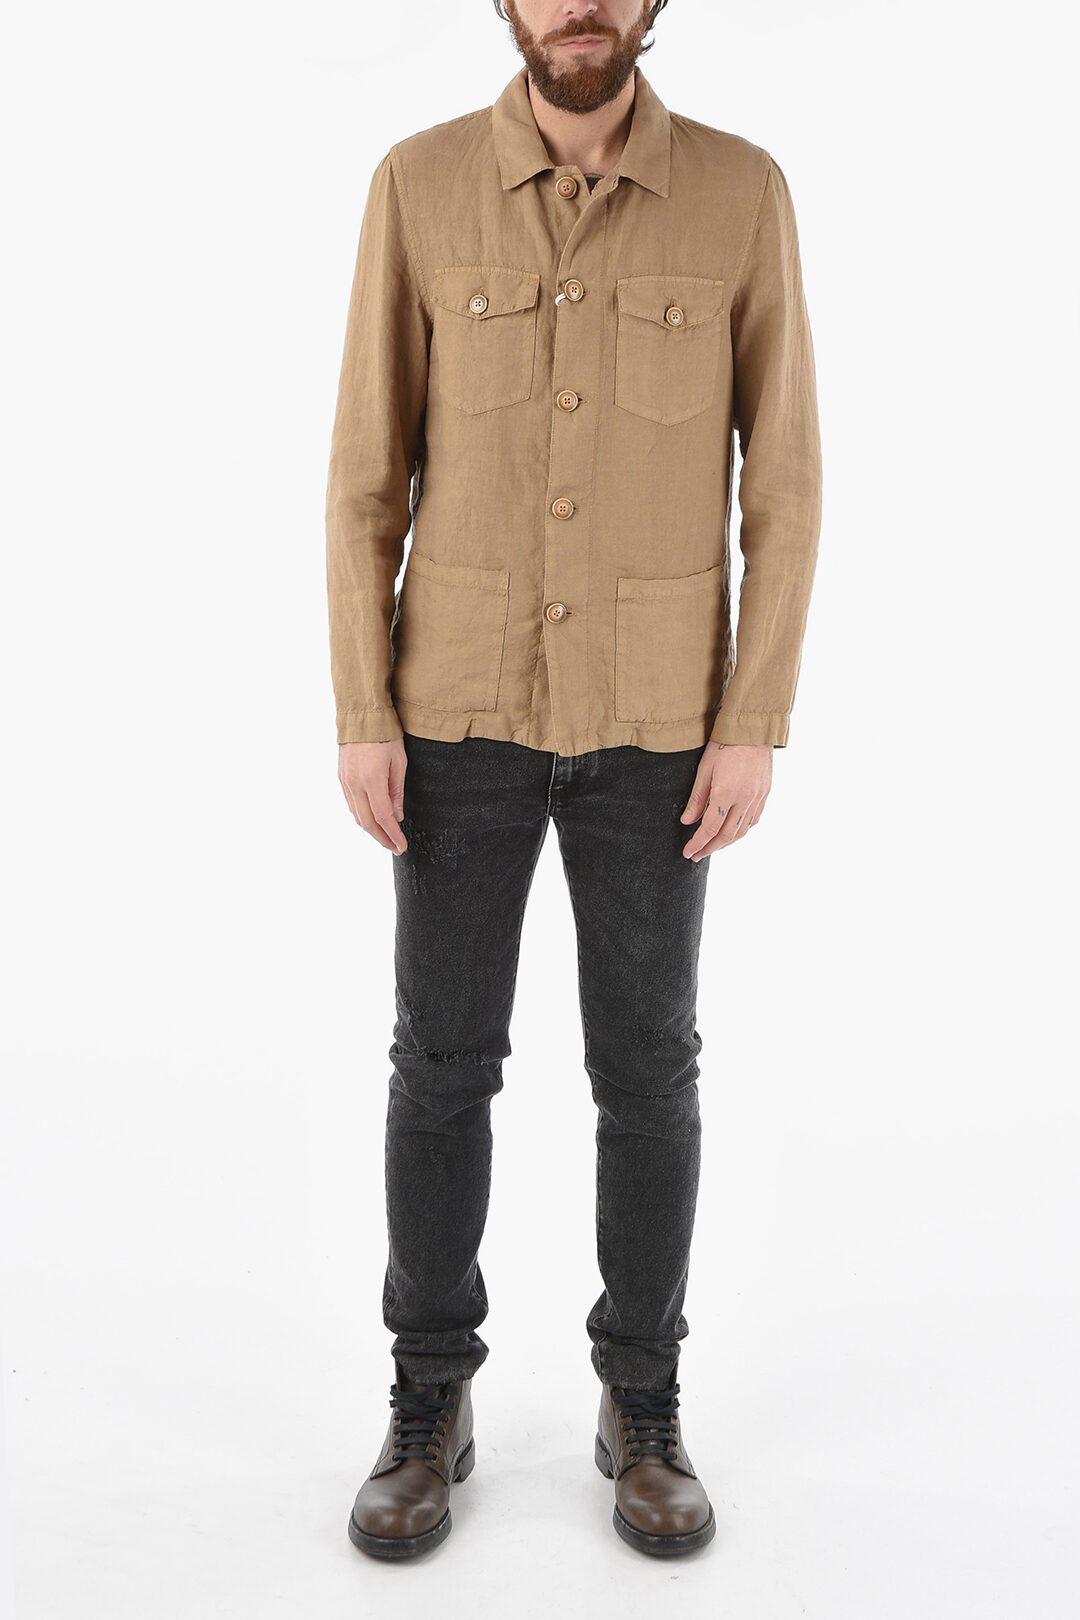 Altea Flax DERBY Utility Overshirt men - Glamood Outlet